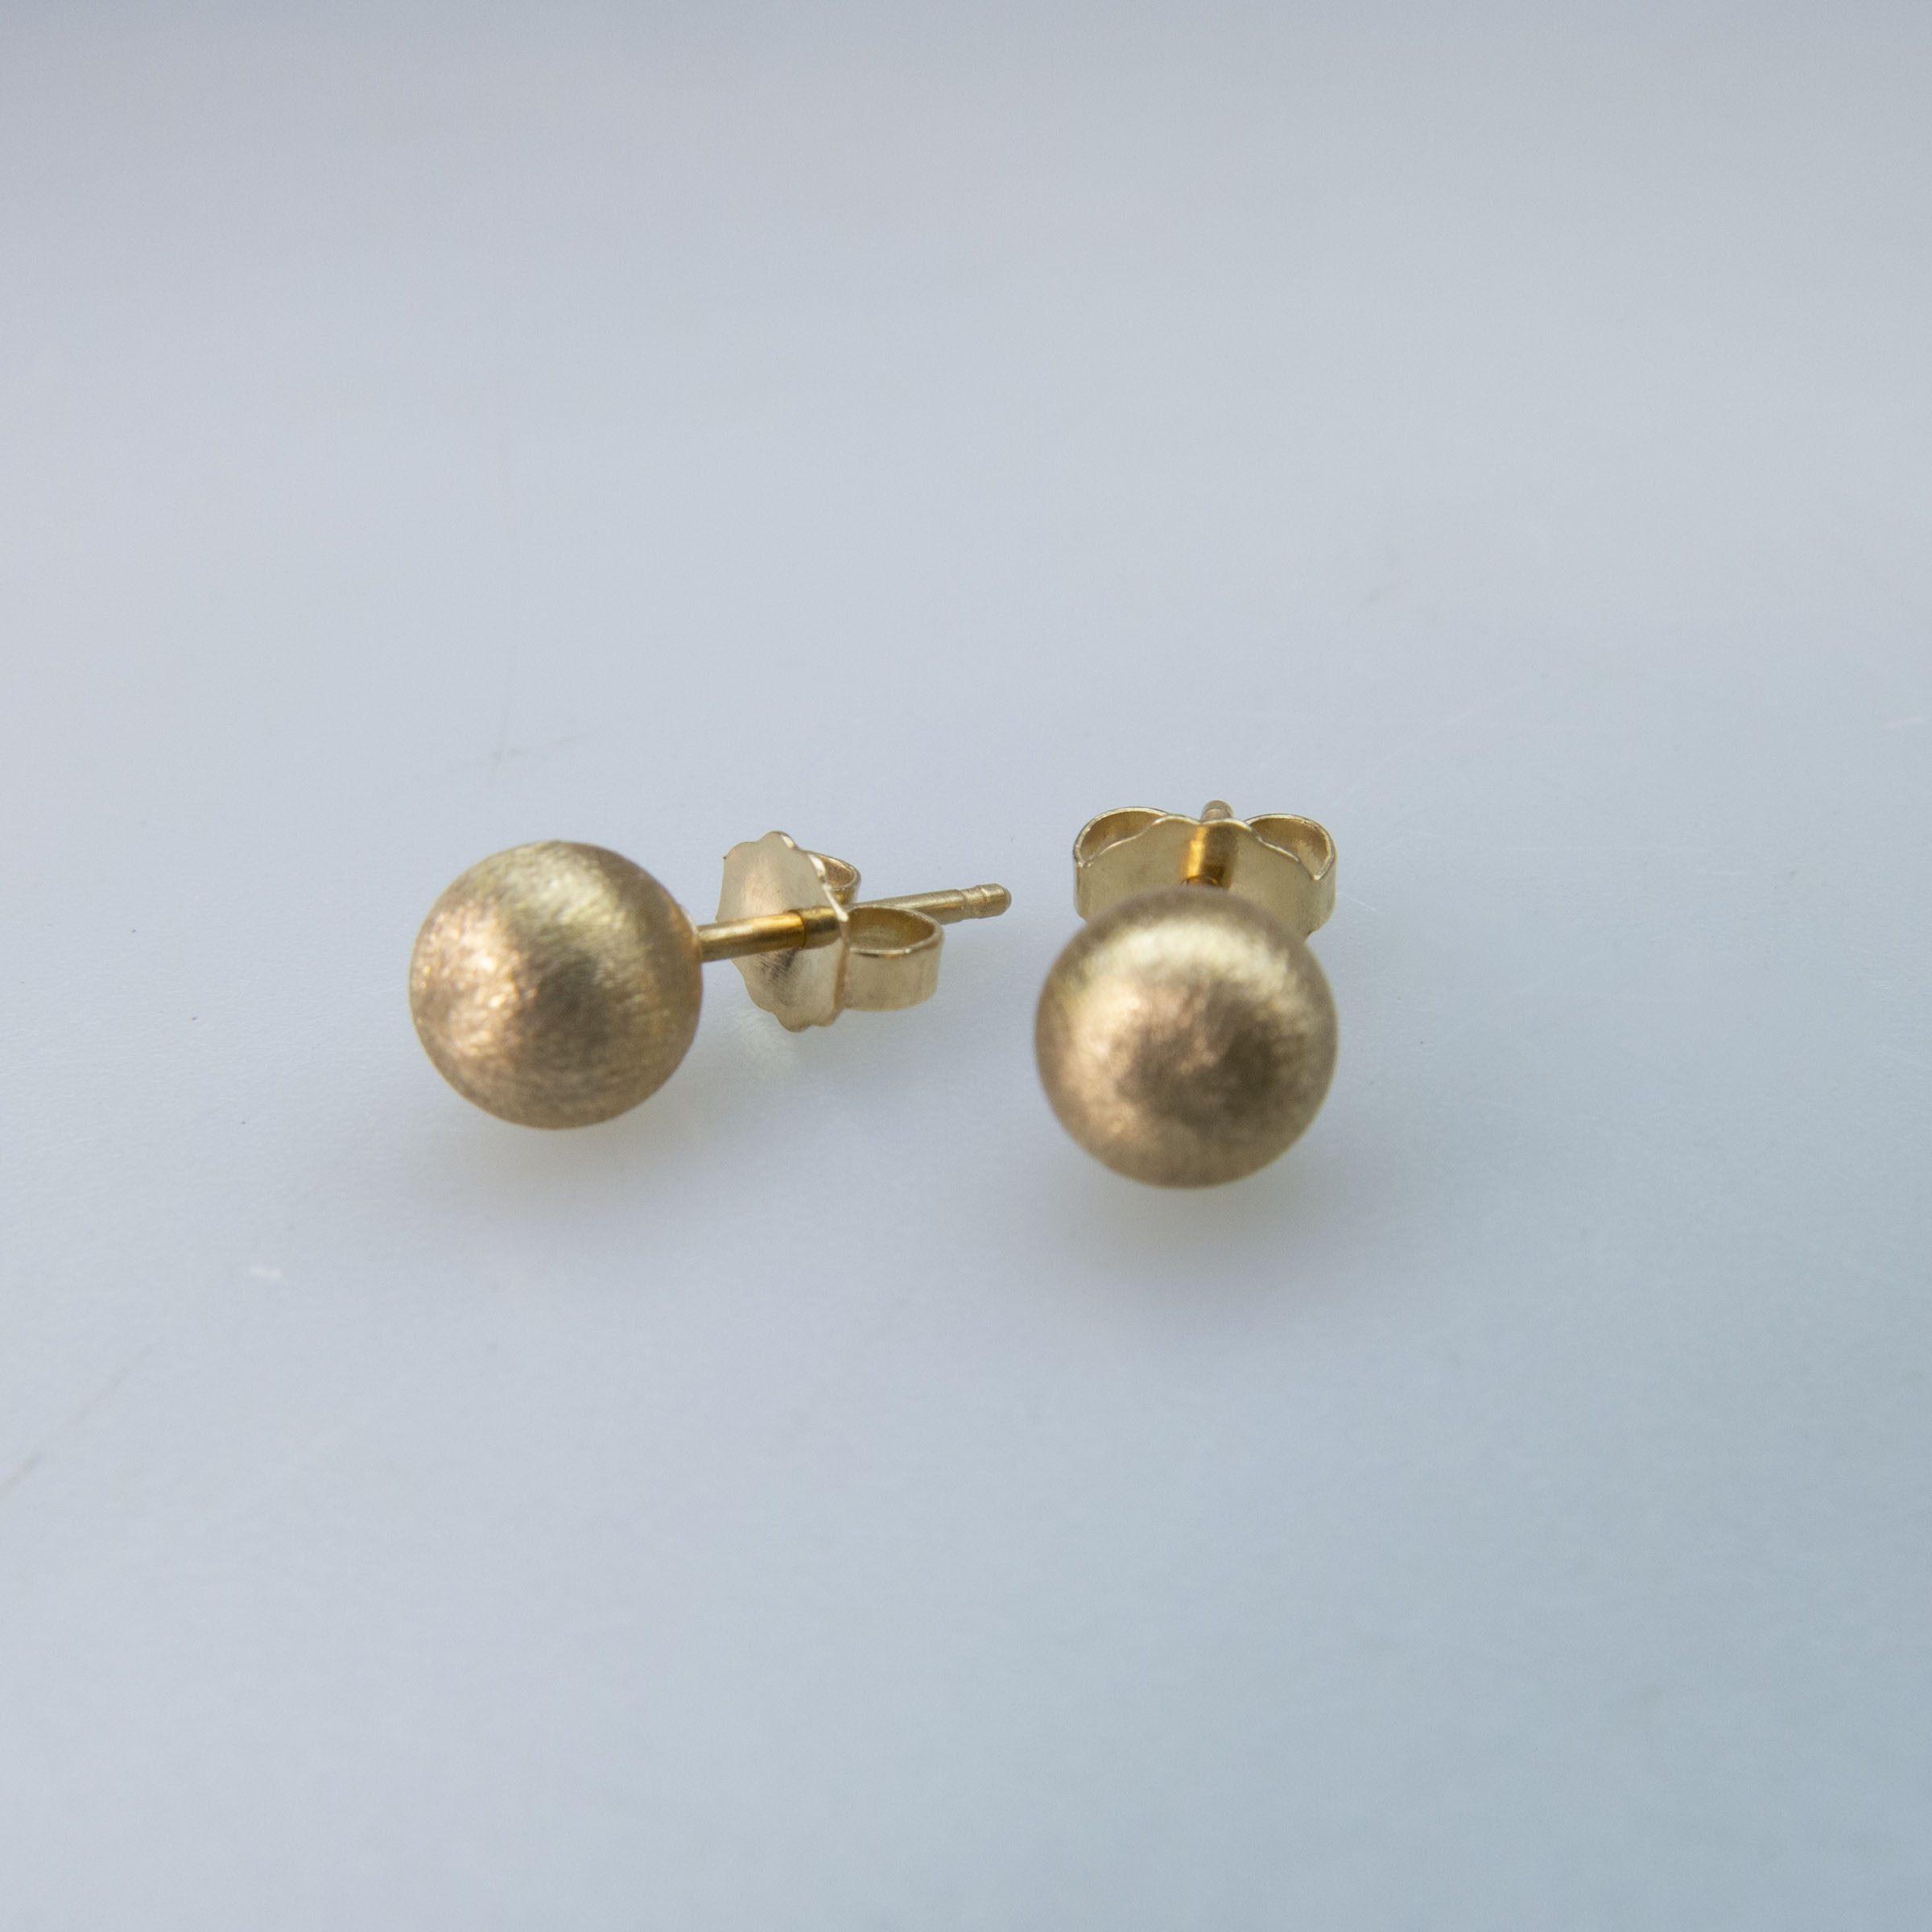 27 x Pairs Of 14k Yellow Gold Stud Earrings